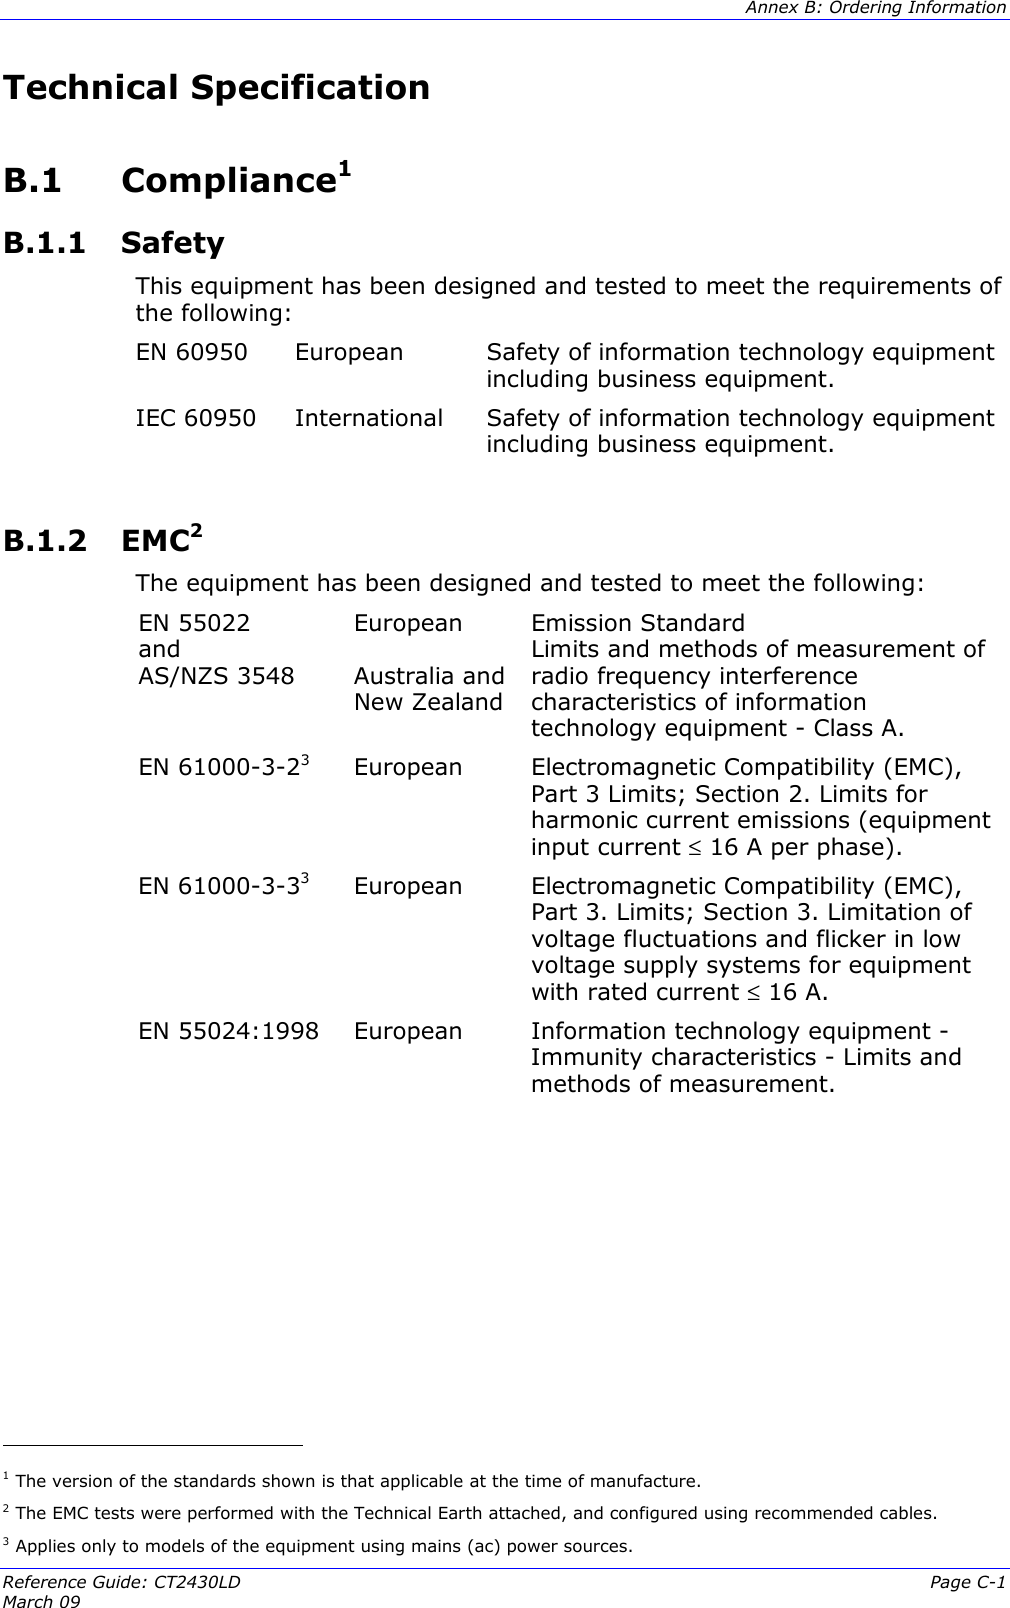  Annex B: Ordering Information  Reference Guide: CT2430LD  Page C-1 March 09   Technical Specification  B.1  Compliance1  B.1.1  Safety This equipment has been designed and tested to meet the requirements of the following:  EN 60950  European  Safety of information technology equipment including business equipment. IEC 60950  International  Safety of information technology equipment including business equipment.  B.1.2  EMC2 The equipment has been designed and tested to meet the following:  EN 55022  and AS/NZS 3548   European  Australia and New Zealand Emission Standard Limits and methods of measurement of radio frequency interference characteristics of information technology equipment - Class A. EN 61000-3-23  European  Electromagnetic Compatibility (EMC), Part 3 Limits; Section 2. Limits for harmonic current emissions (equipment input current ≤ 16 A per phase). EN 61000-3-33  European  Electromagnetic Compatibility (EMC), Part 3. Limits; Section 3. Limitation of voltage fluctuations and flicker in low voltage supply systems for equipment with rated current ≤ 16 A. EN 55024:1998   European  Information technology equipment - Immunity characteristics - Limits and methods of measurement.                                             1 The version of the standards shown is that applicable at the time of manufacture. 2 The EMC tests were performed with the Technical Earth attached, and configured using recommended cables. 3 Applies only to models of the equipment using mains (ac) power sources. 